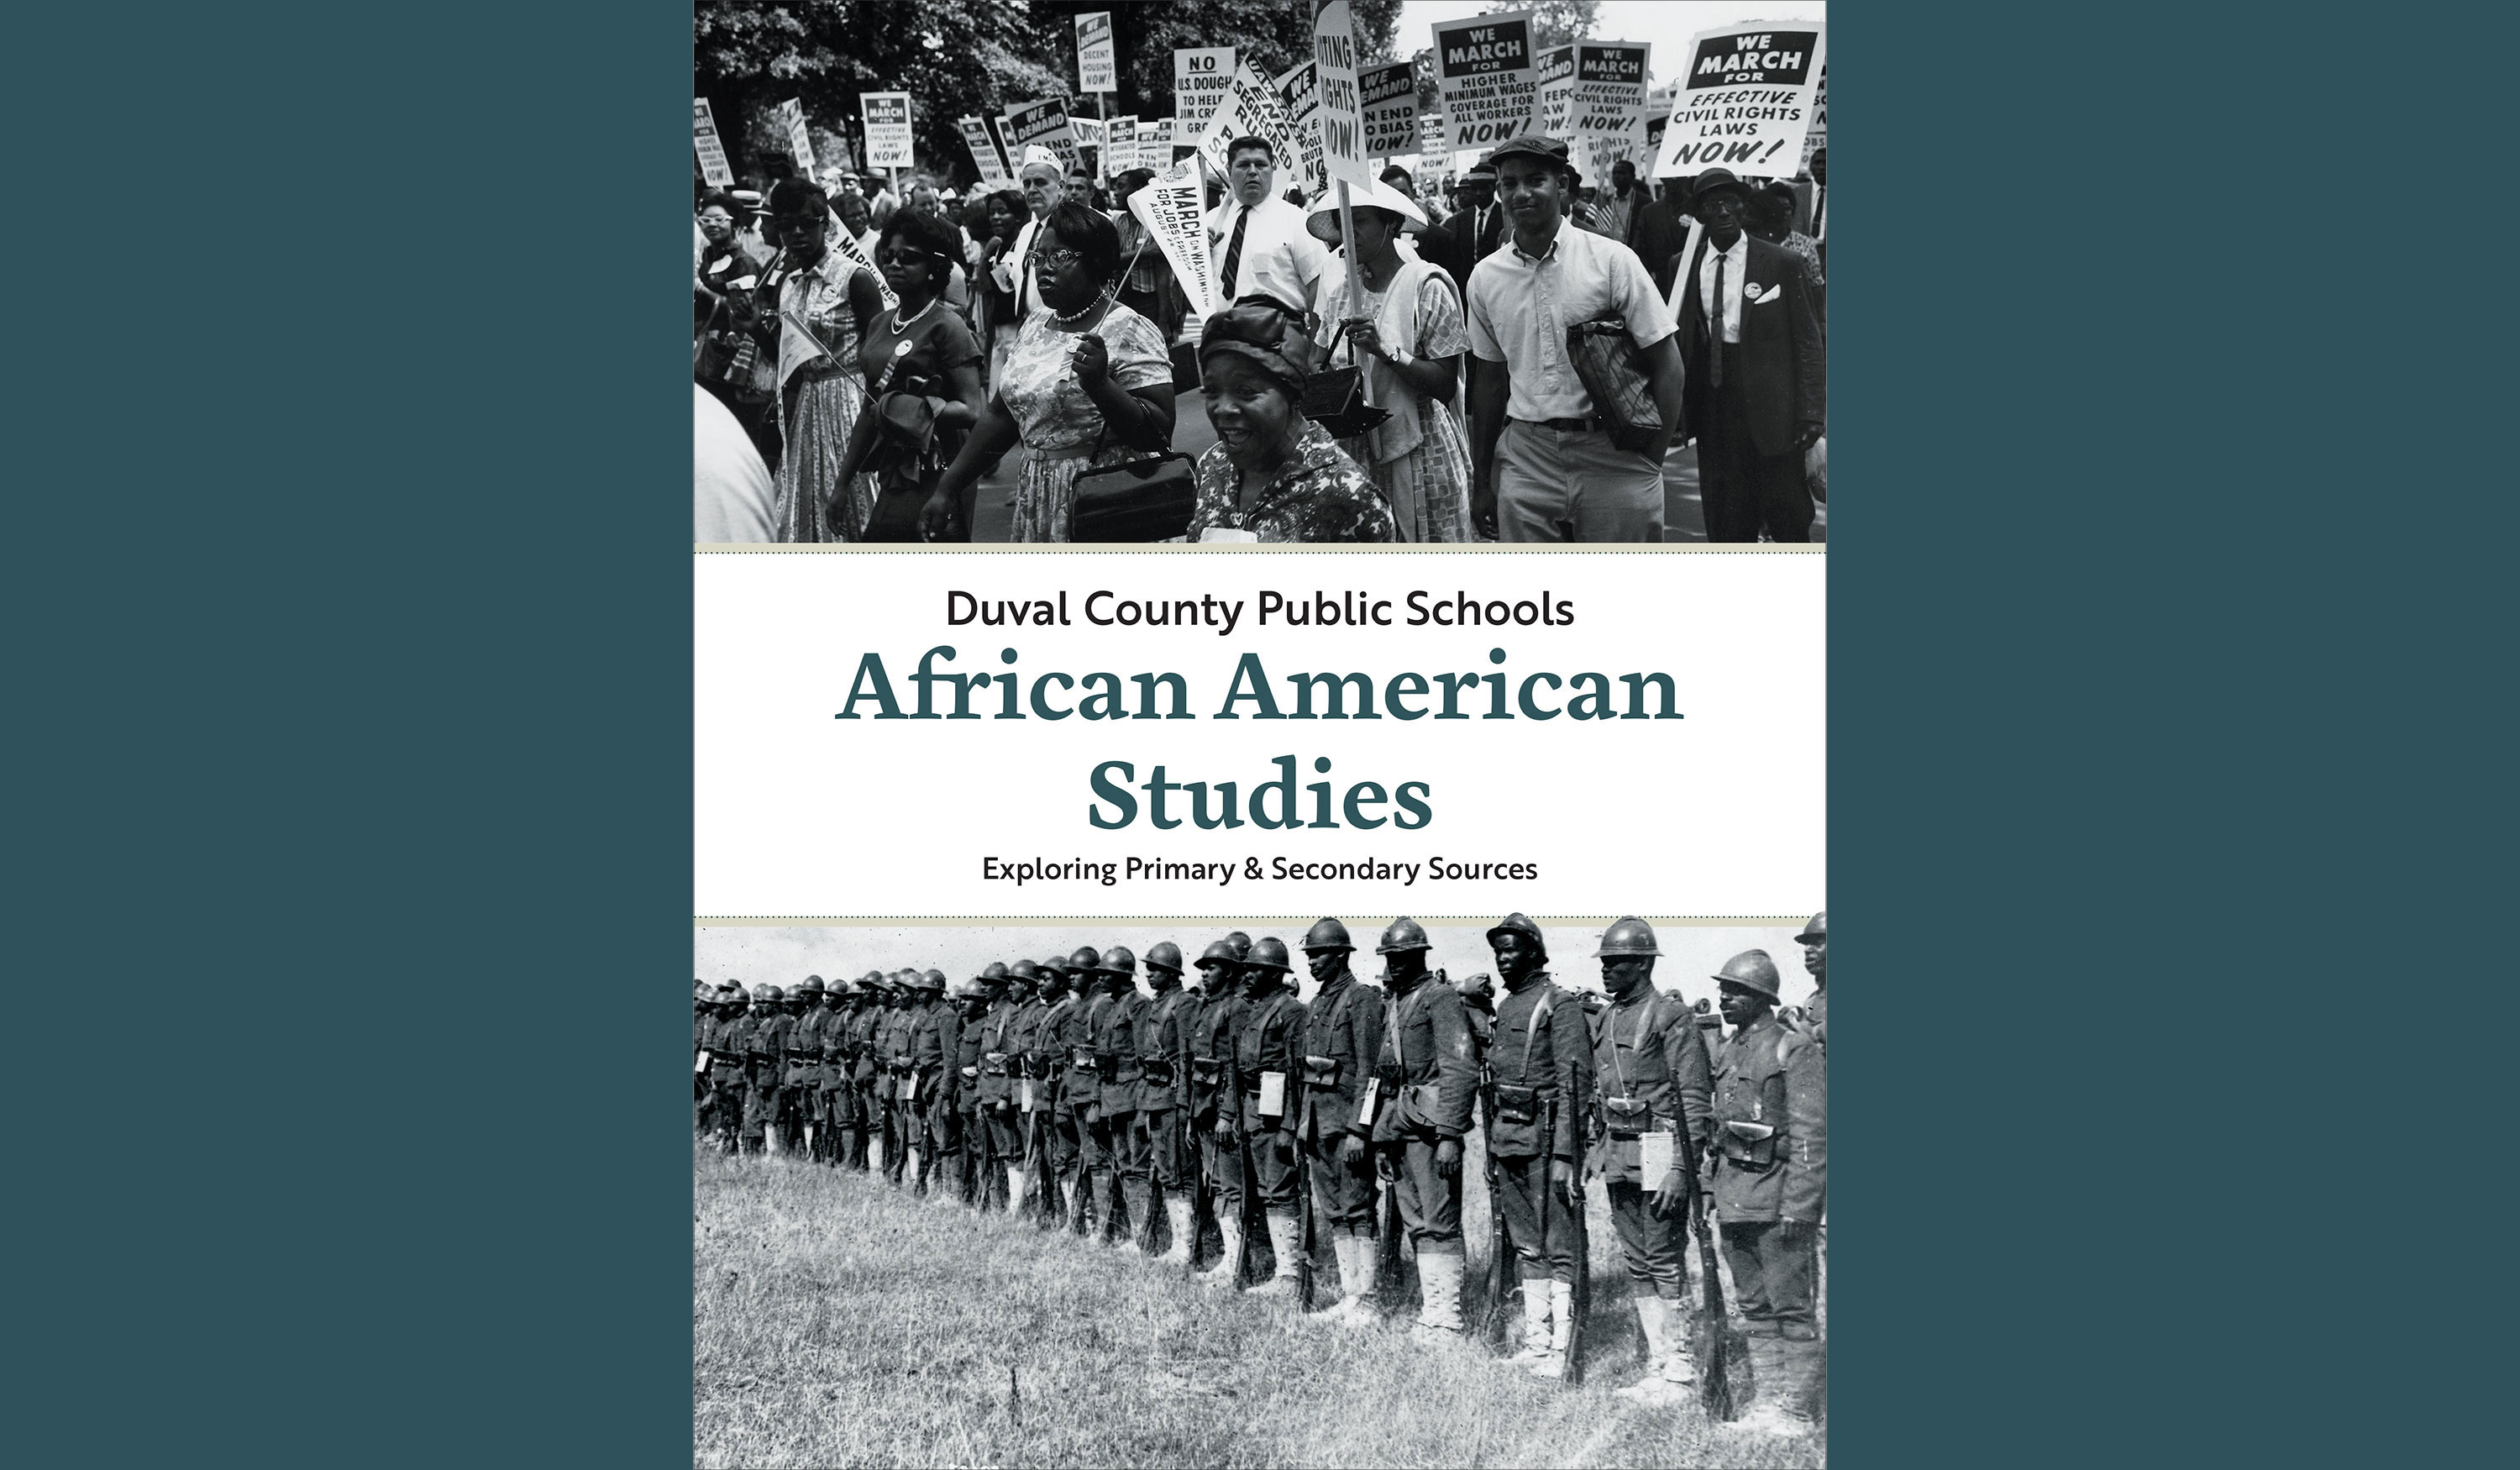 Beyond Traditional African American Studies: Using Local History to Increase Student Engagement